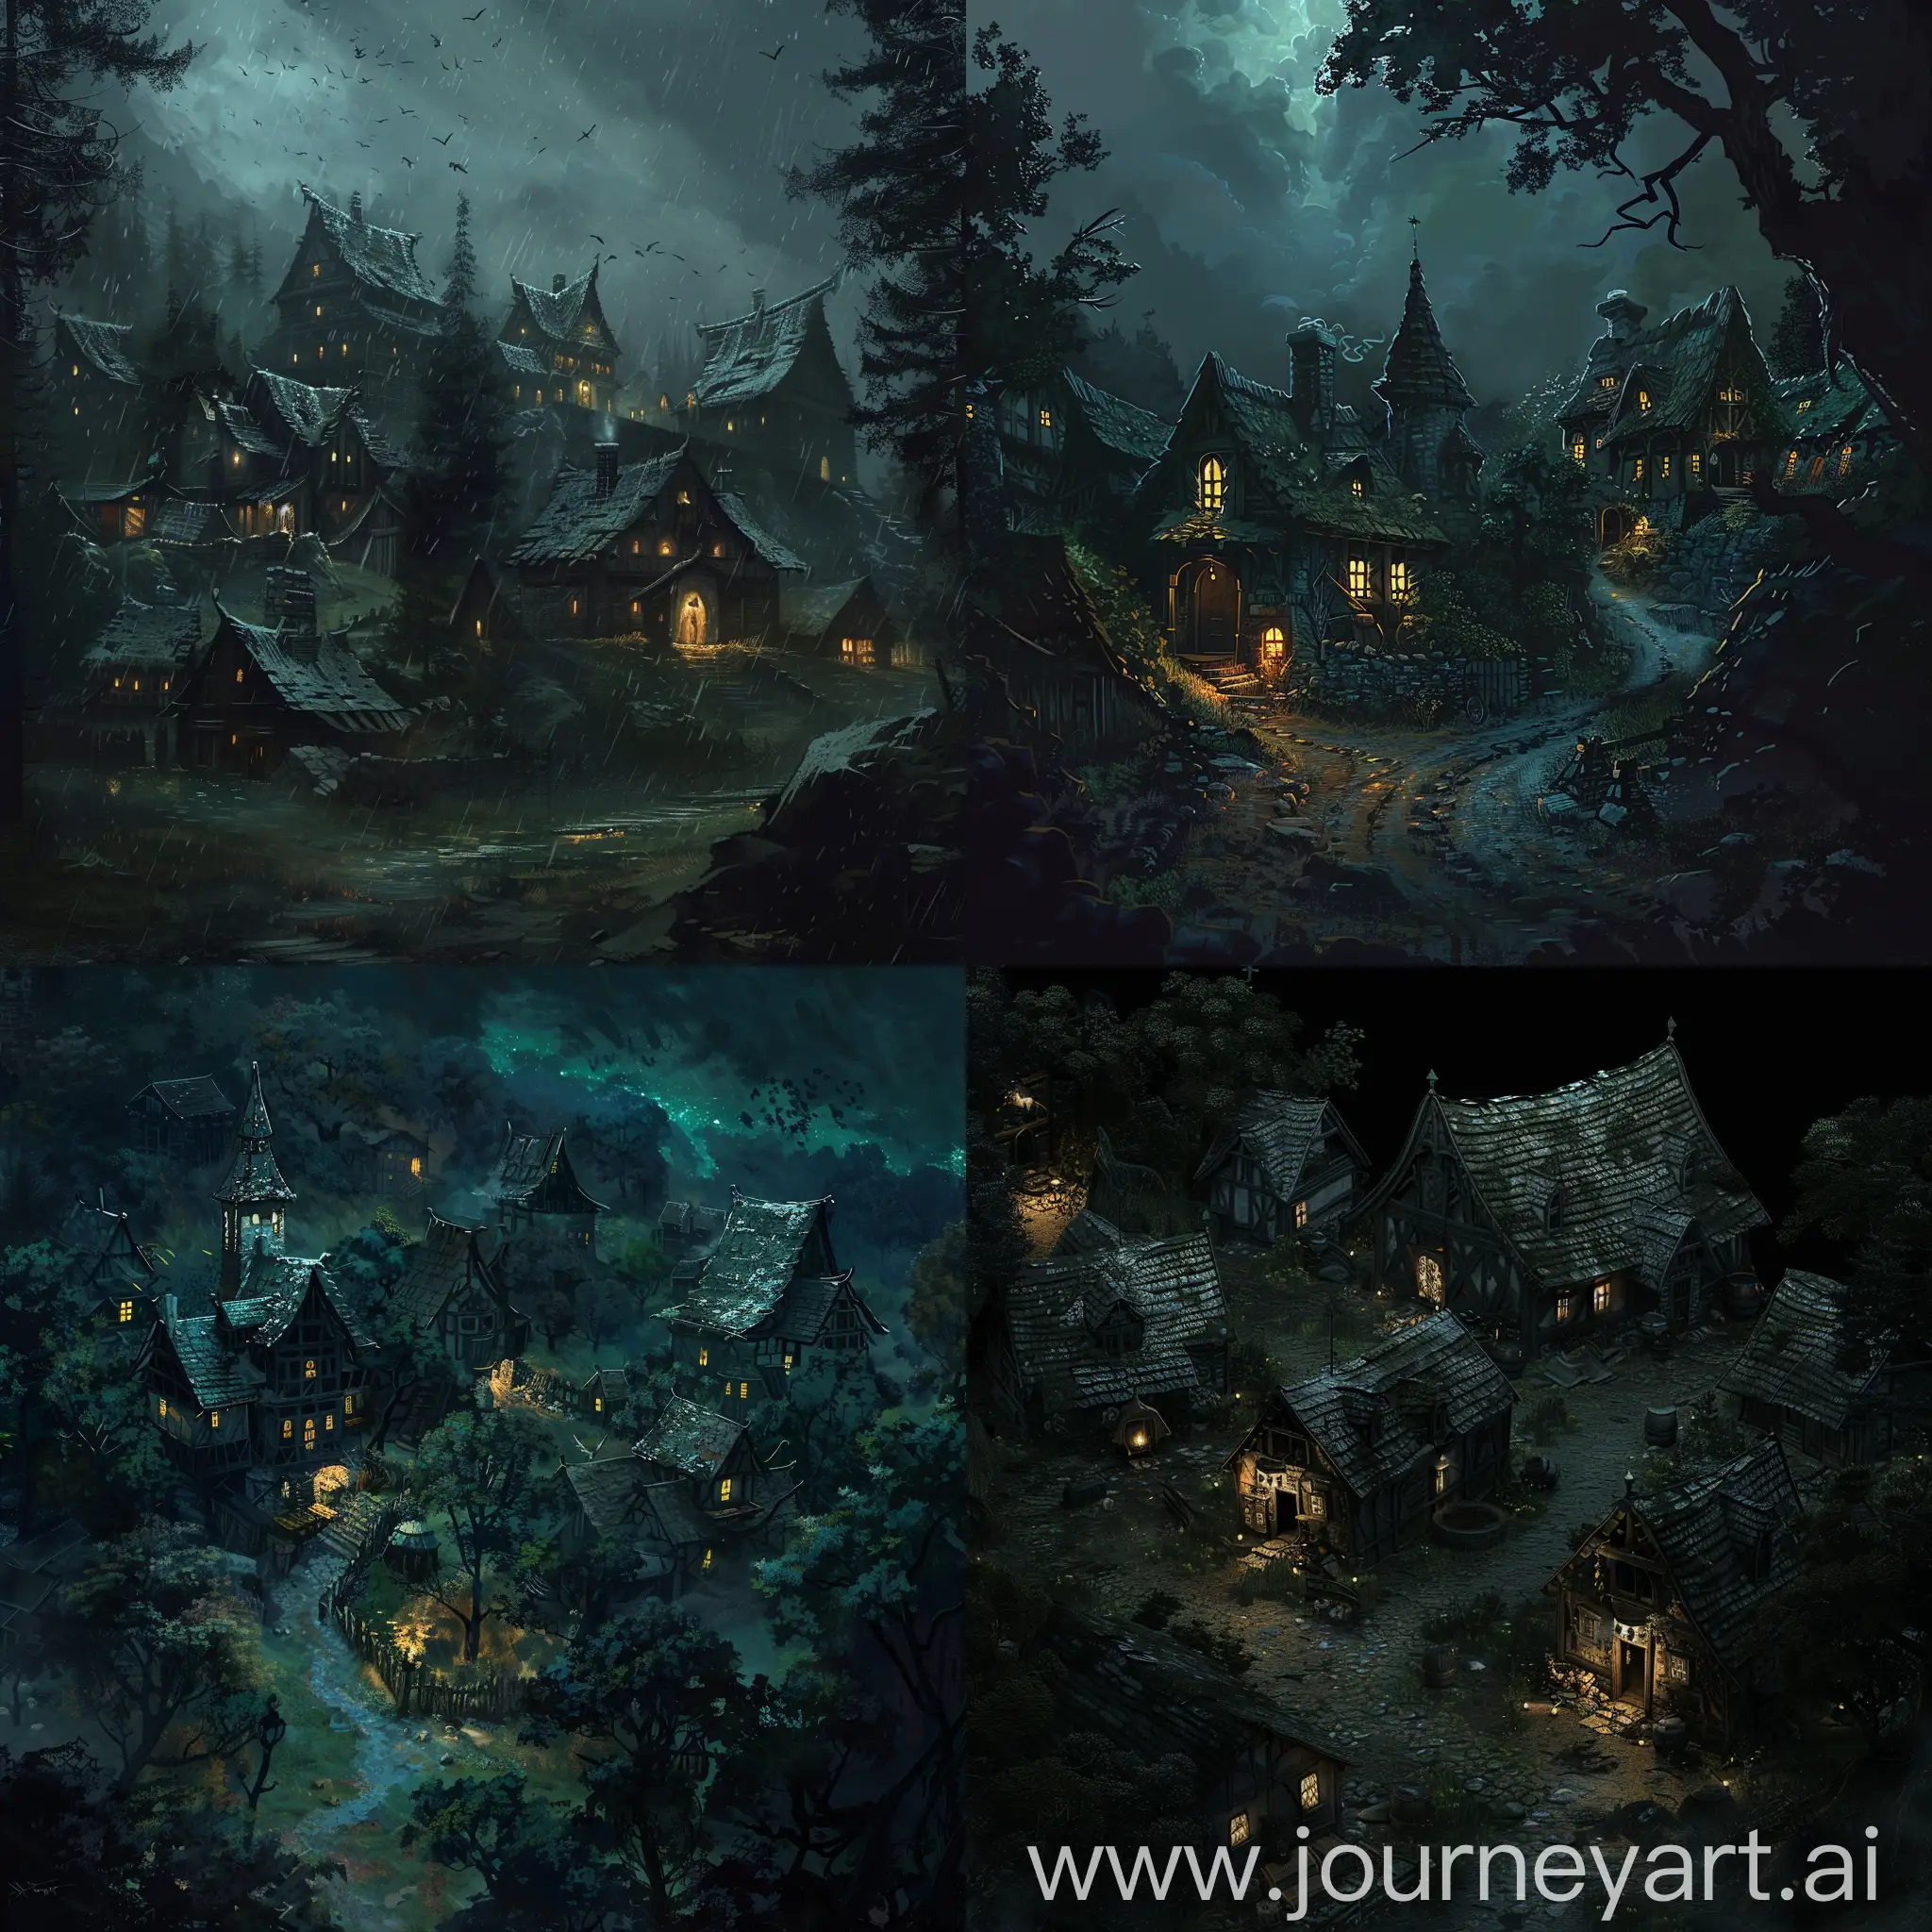 dnd dark fantasy theme,there is village with few houses,background is dark night,Very high quality,